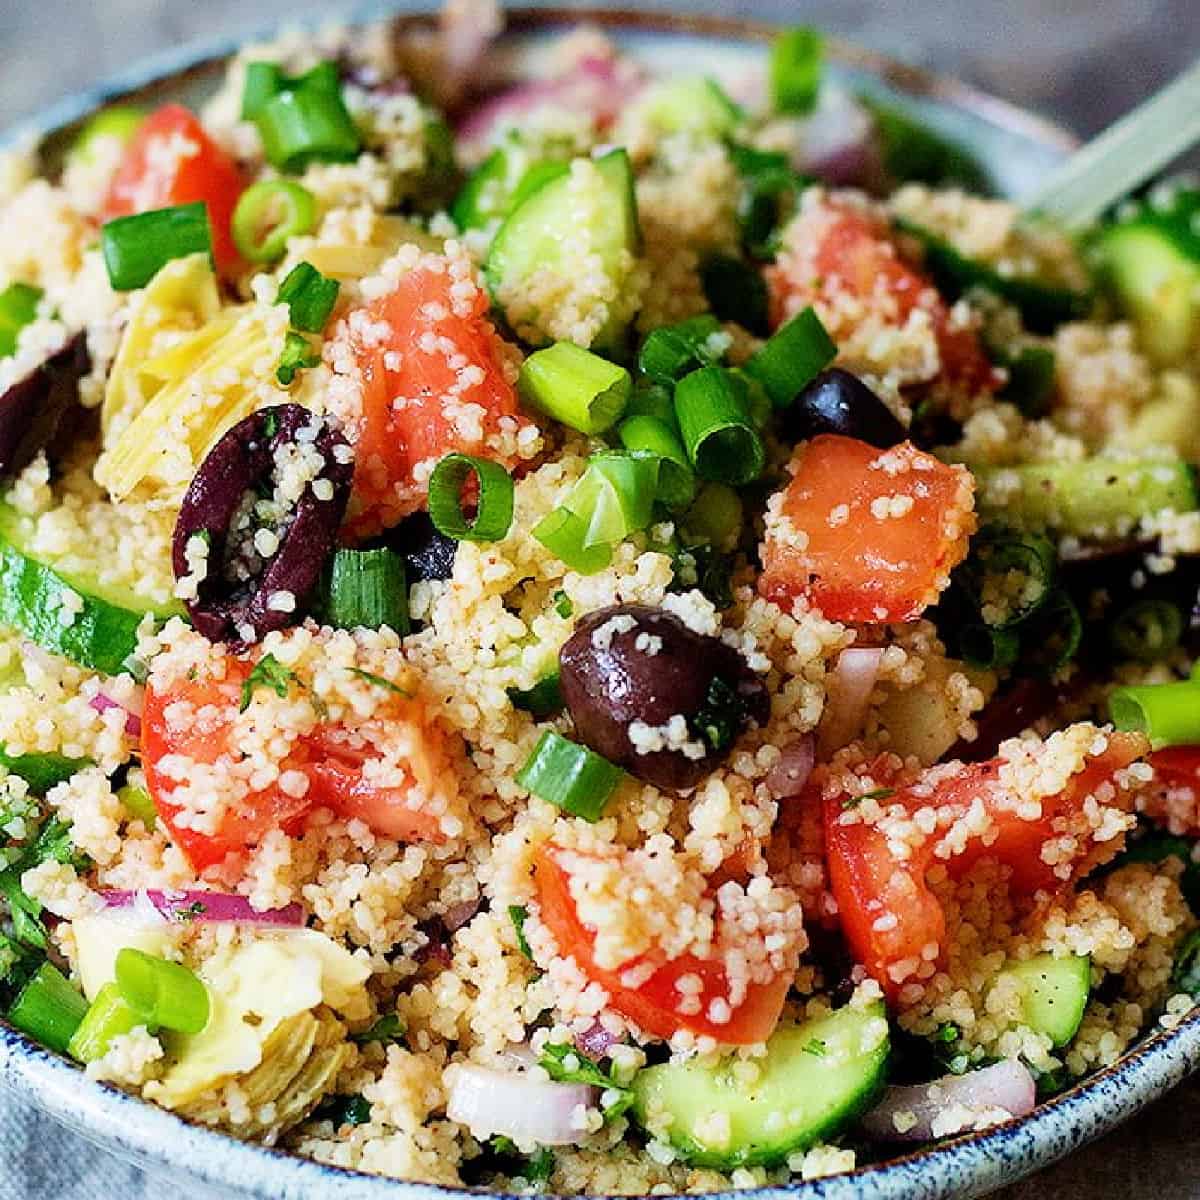 An easy couscous salad packed with Mediterranean flavors. This couscous salad recipe comes together in only 15 minutes and makes an amazing side dish.
